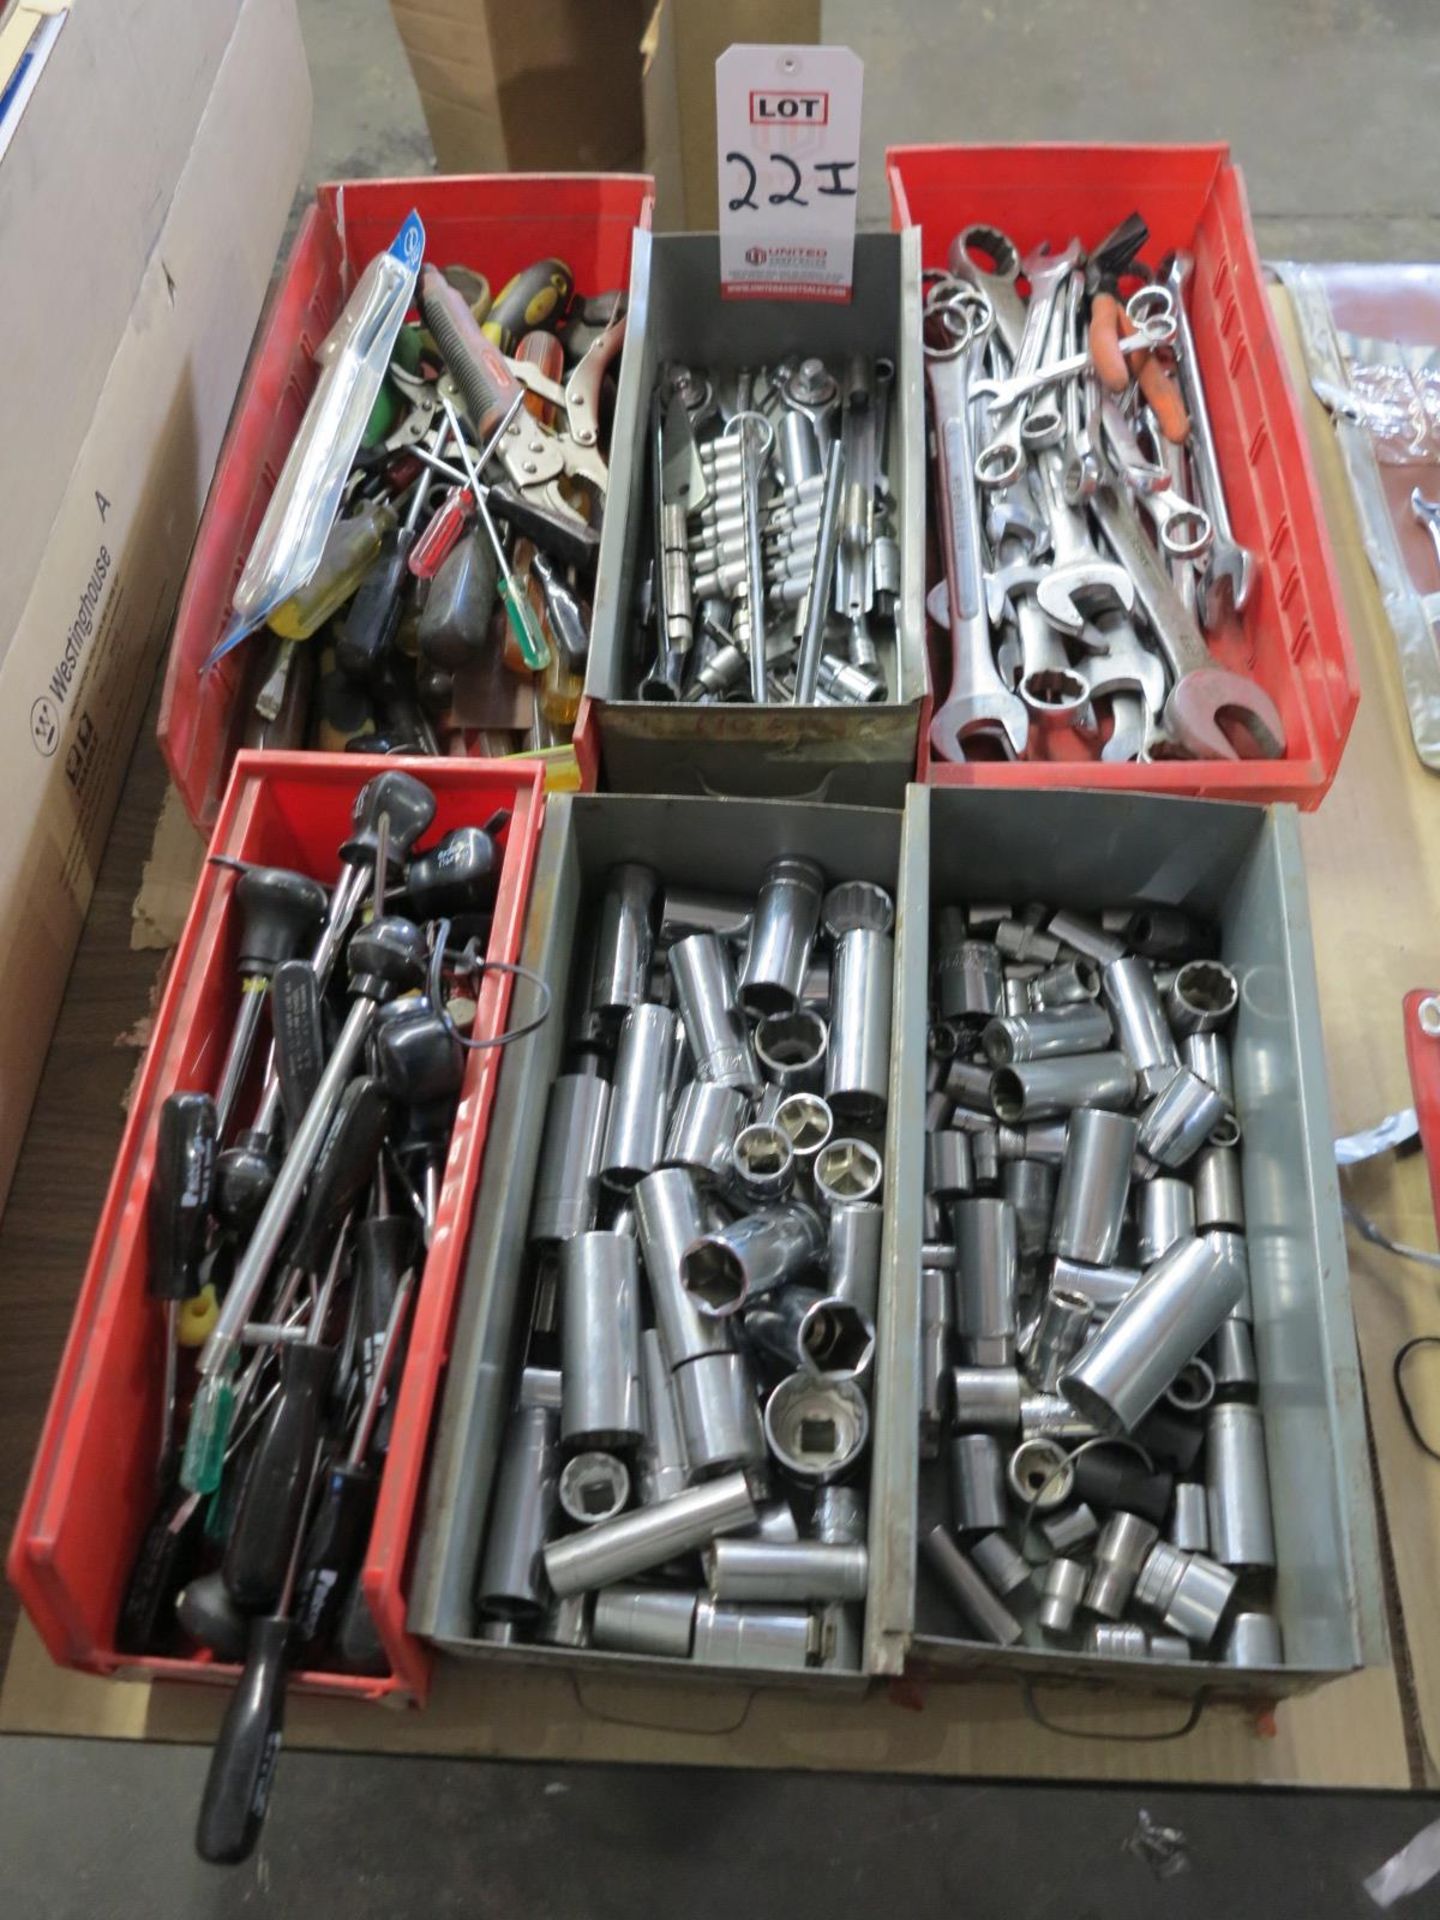 LOT - (6) BINS OF SOCKETS AND MISC HAND TOOLS, WRENCHES, ETC.